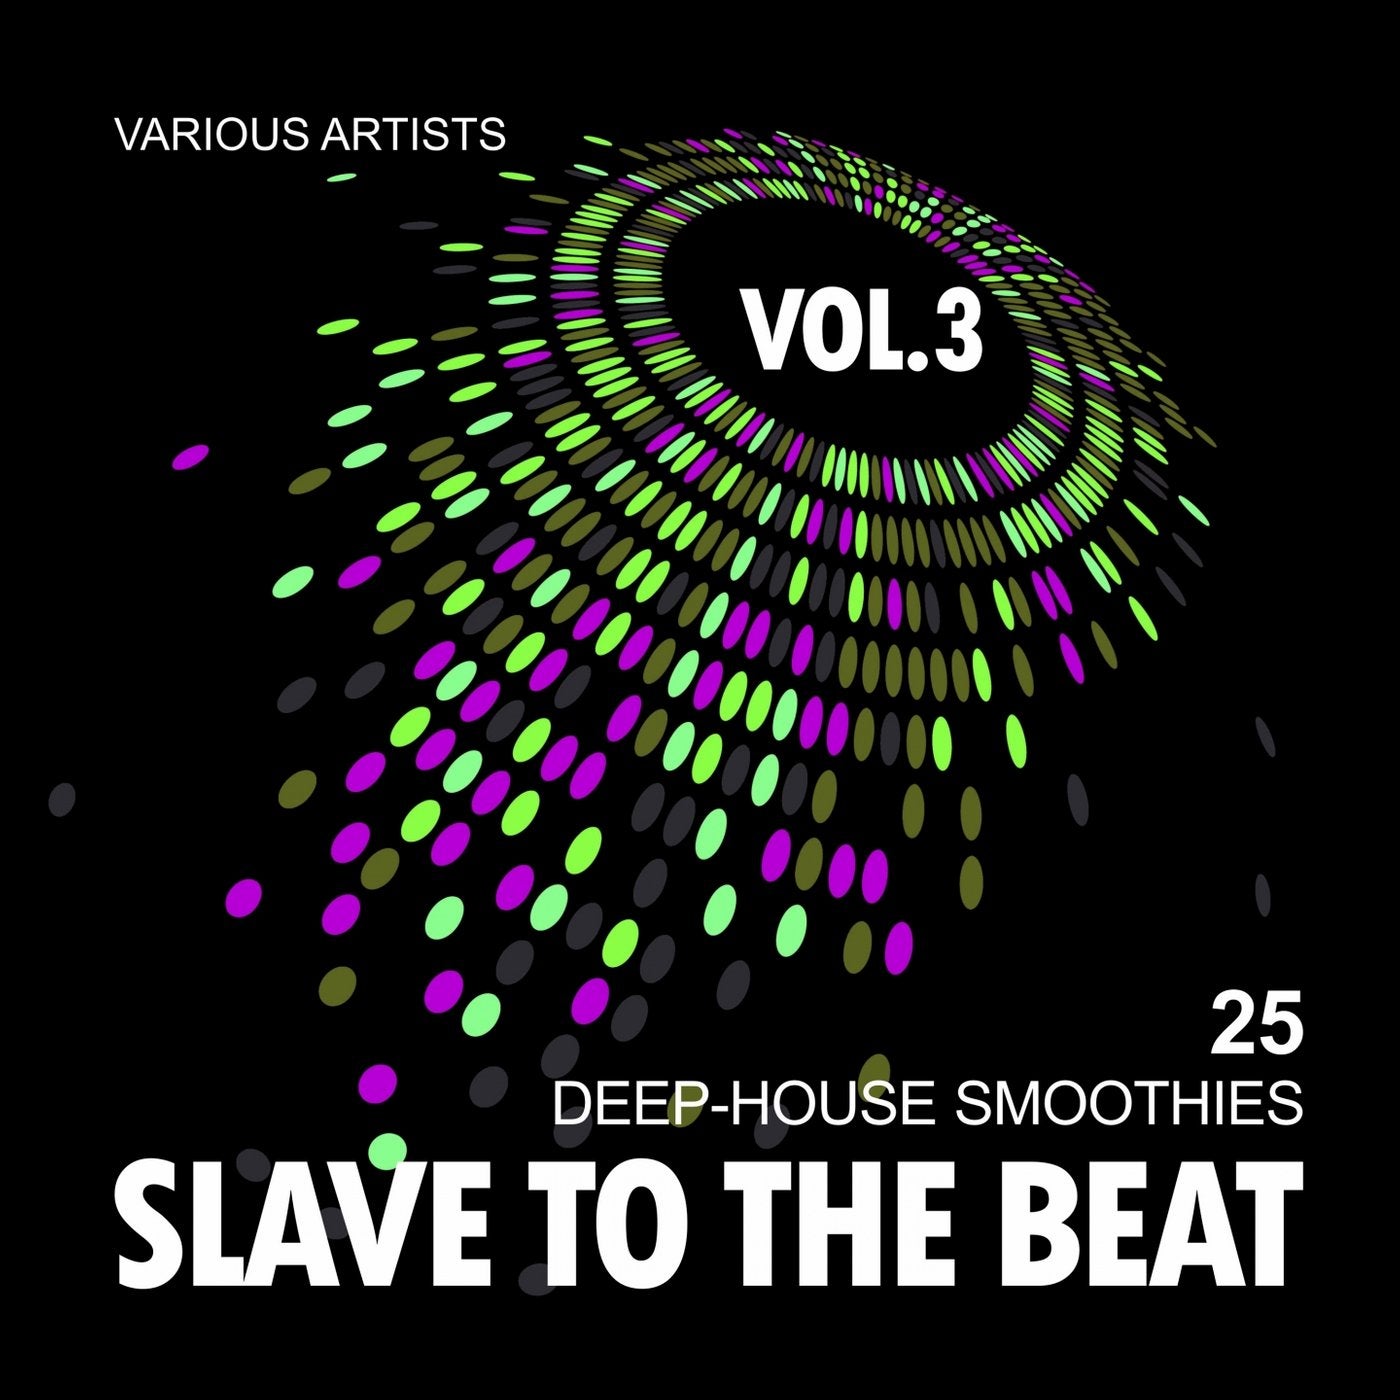 Slave To The Beat (25 Deep-House Smoothies), Vol. 3